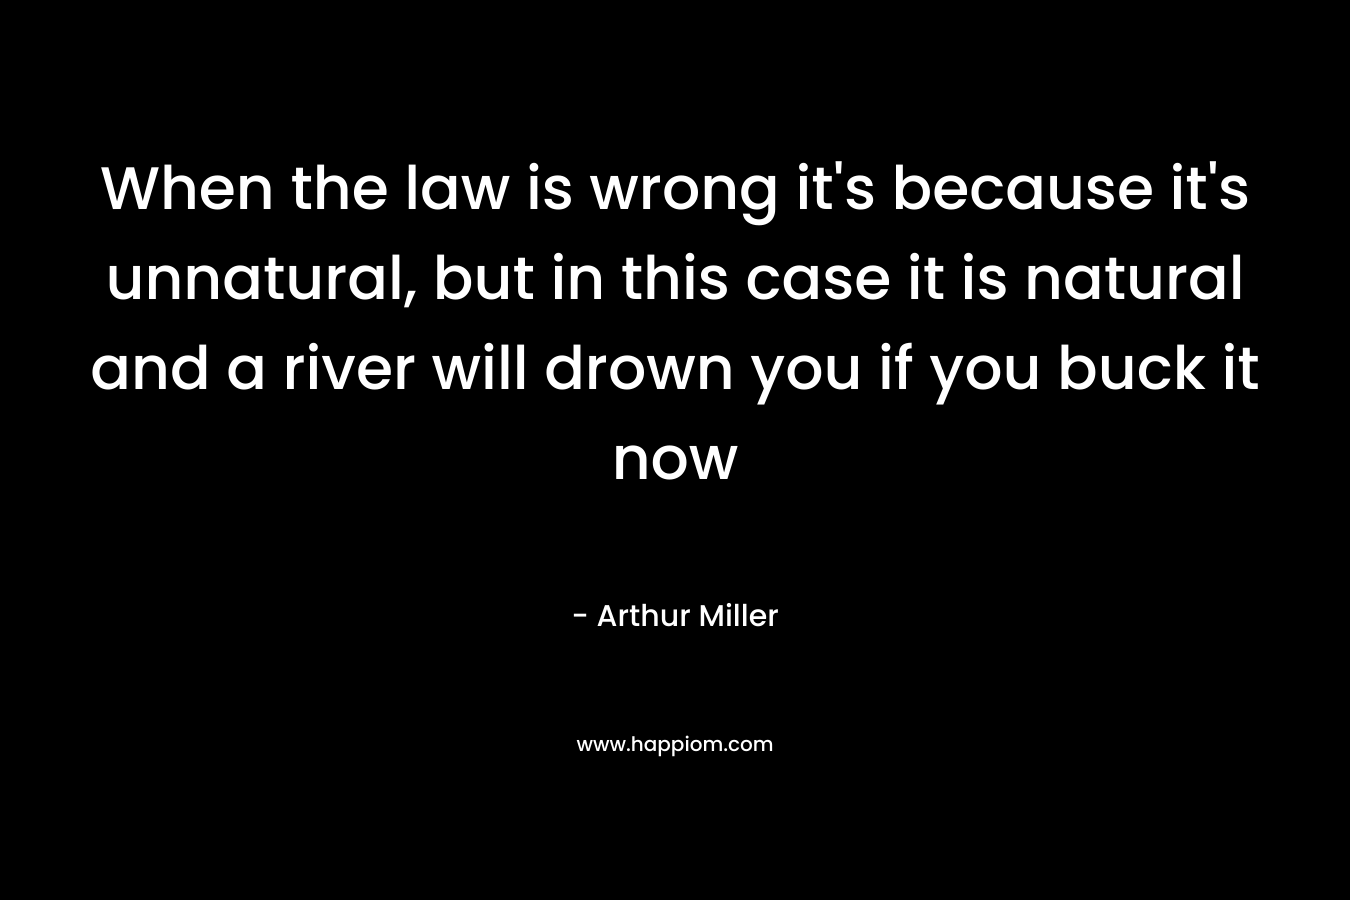 When the law is wrong it’s because it’s unnatural, but in this case it is natural and a river will drown you if you buck it now – Arthur Miller